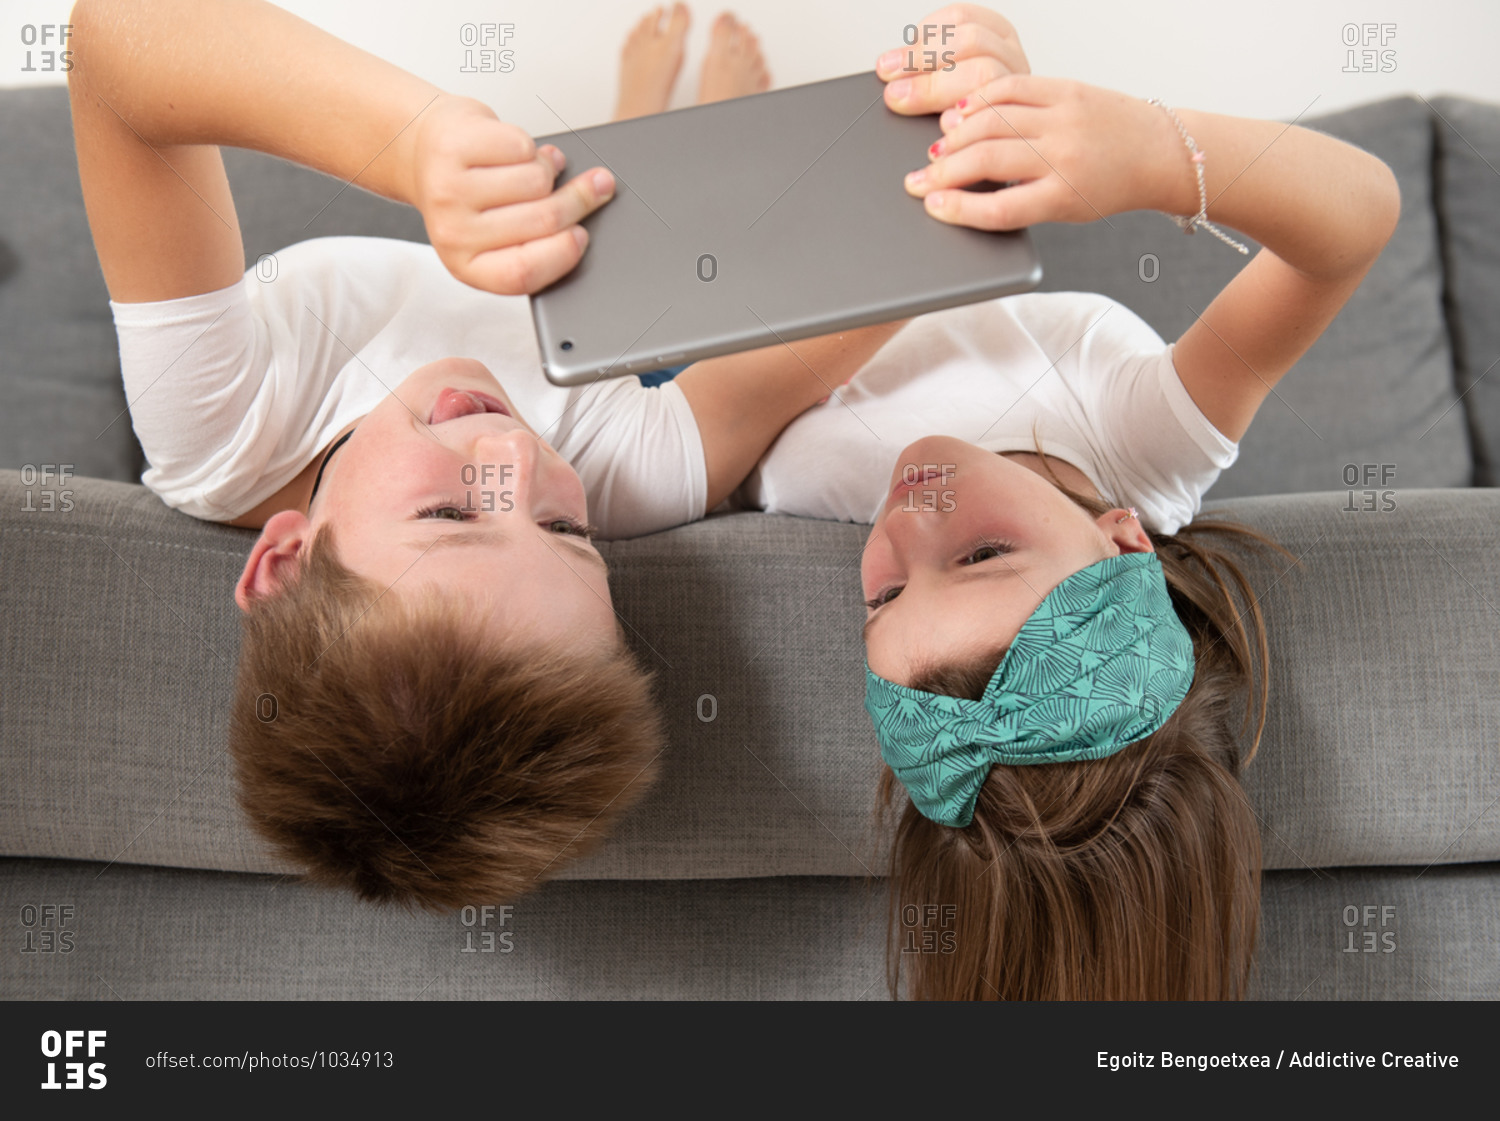 Brother and sister lying face down on the couch while entertained using tablet during weekend